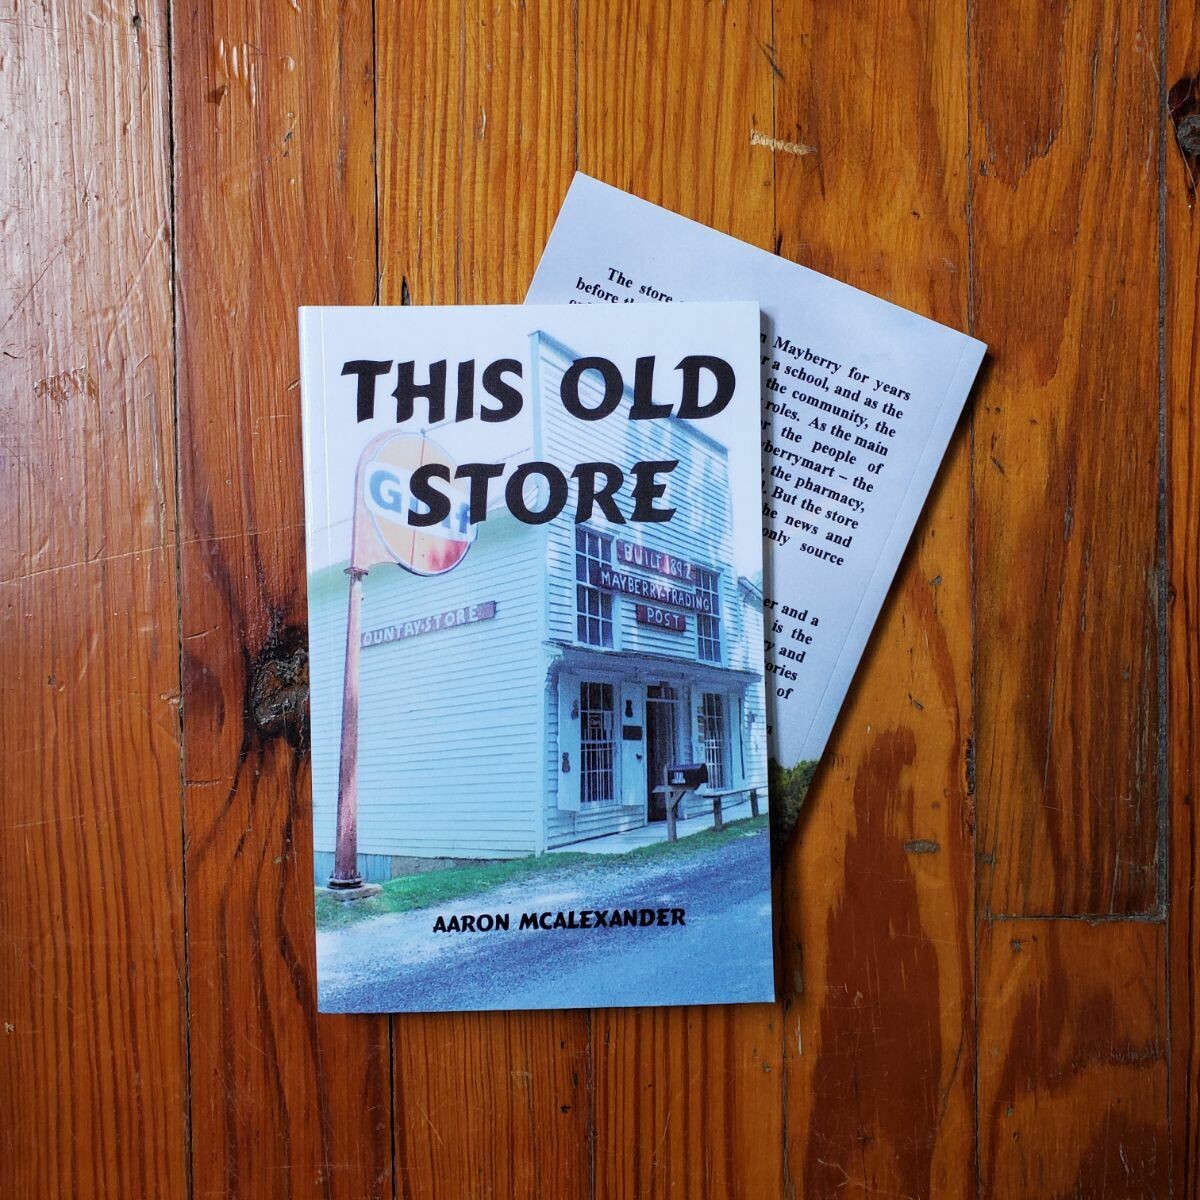 This Old Store by: Aaron McAlexander